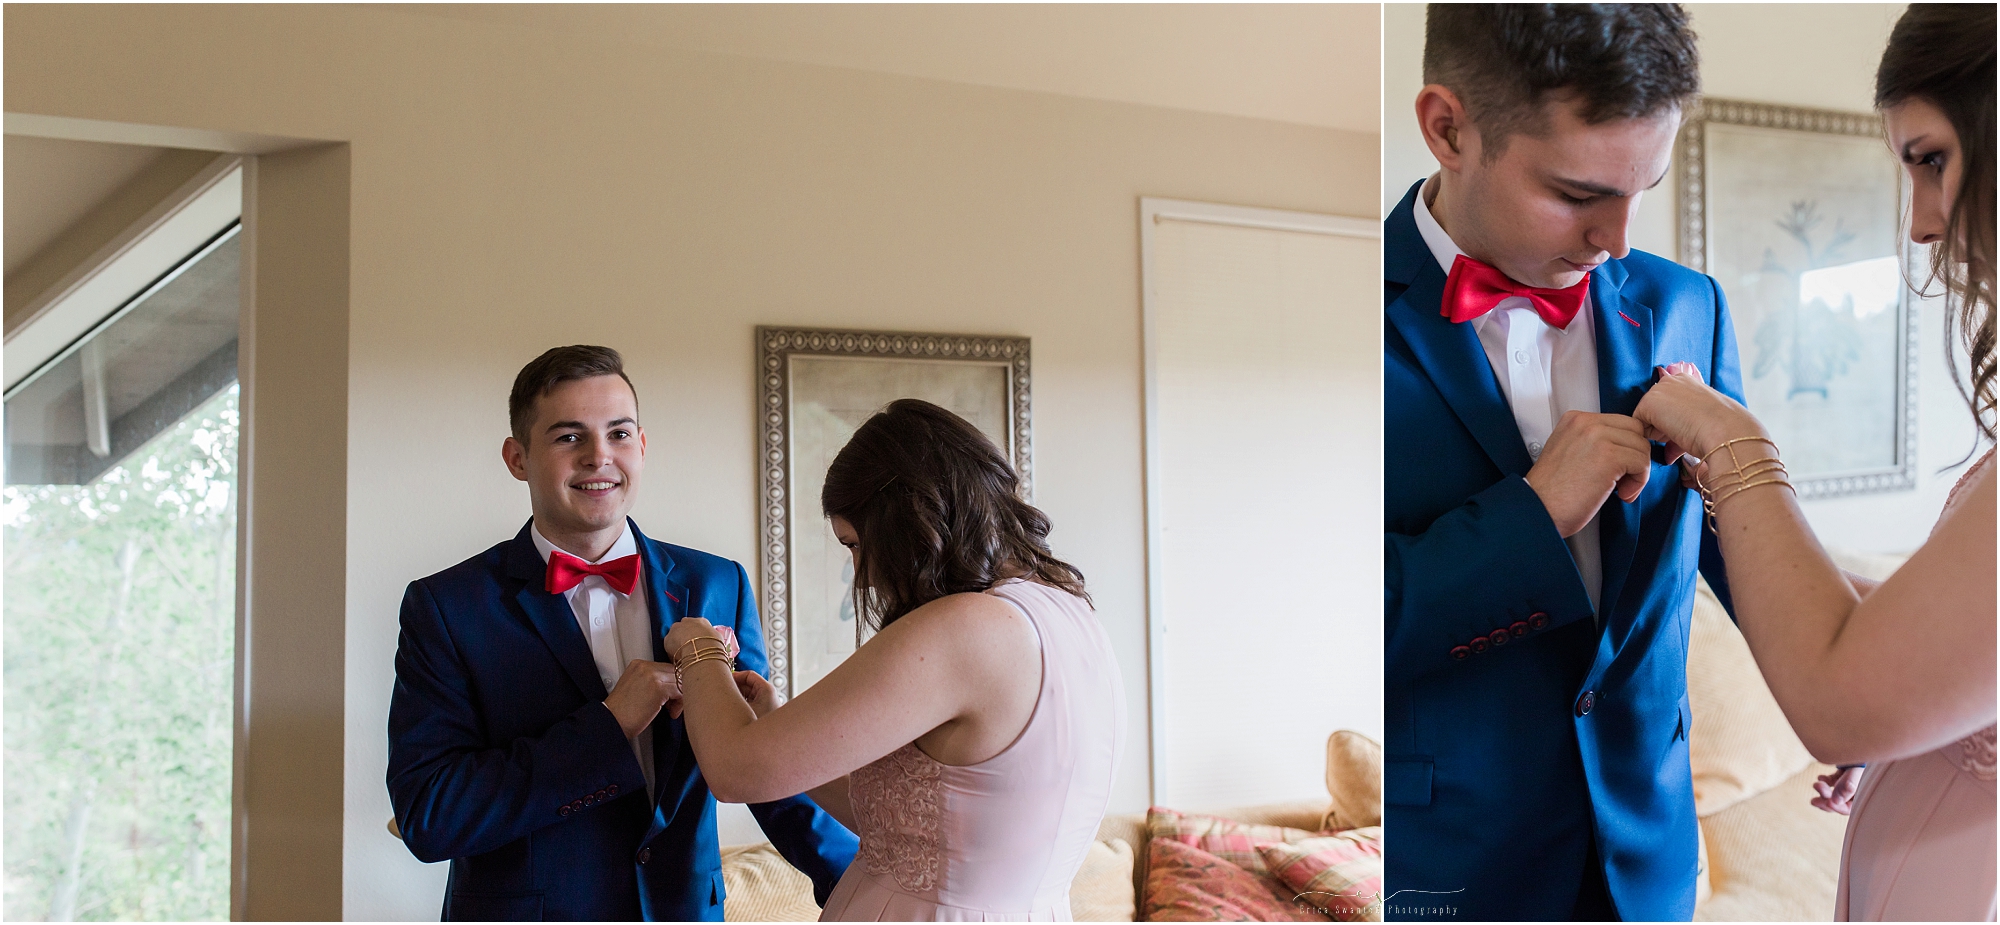 A very dapper brother of the groom wearing a blue suit and red bow tie! 